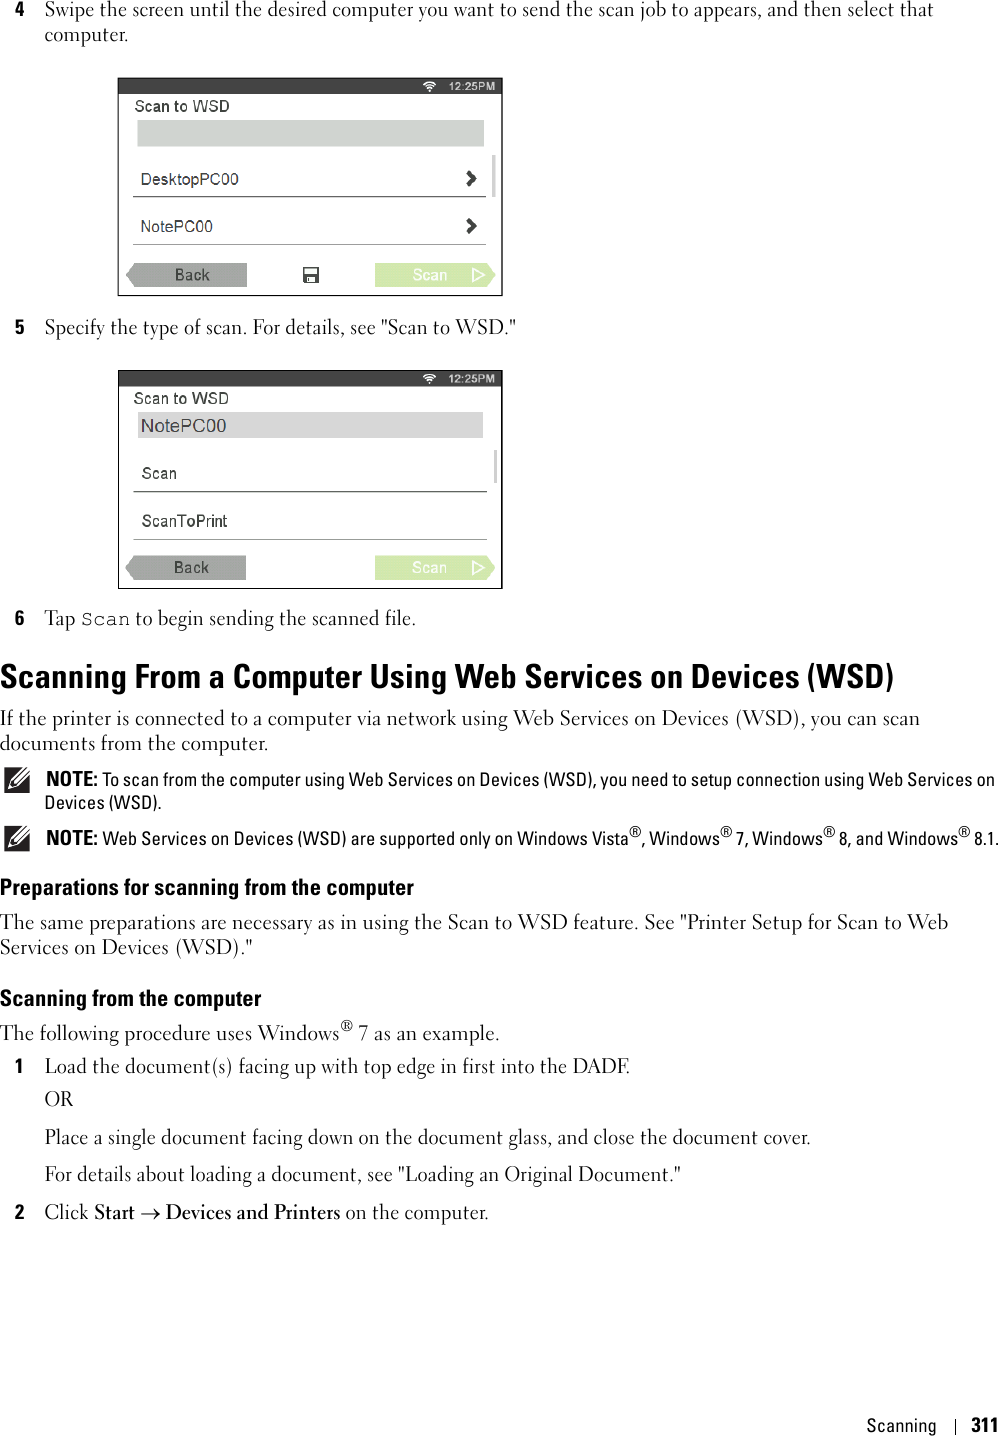 Scanning3114Swipe the screen until the desired computer you want to send the scan job to appears, and then select that computer.5Specify the type of scan. For details, see &quot;Scan to WSD.&quot;6Ta p  Scan to begin sending the scanned file.Scanning From a Computer Using Web Services on Devices (WSD)If the printer is connected to a computer via network using Web Services on Devices (WSD), you can scan documents from the computer.  NOTE: To scan from the computer using Web Services on Devices (WSD), you need to setup connection using Web Services on Devices (WSD). NOTE: Web Services on Devices (WSD) are supported only on Windows Vista®, Windows® 7, Windows® 8, and Windows® 8.1.Preparations for scanning from the computerThe same preparations are necessary as in using the Scan to WSD feature. See &quot;Printer Setup for Scan to Web Services on Devices (WSD).&quot;Scanning from the computerThe following procedure uses Windows® 7 as an example.1Load the document(s) facing up with top edge in first into the DADF.ORPlace a single document facing down on the document glass, and close the document cover. For details about loading a document, see &quot;Loading an Original Document.&quot; 2Click Start  Devices and Printers on the computer. 